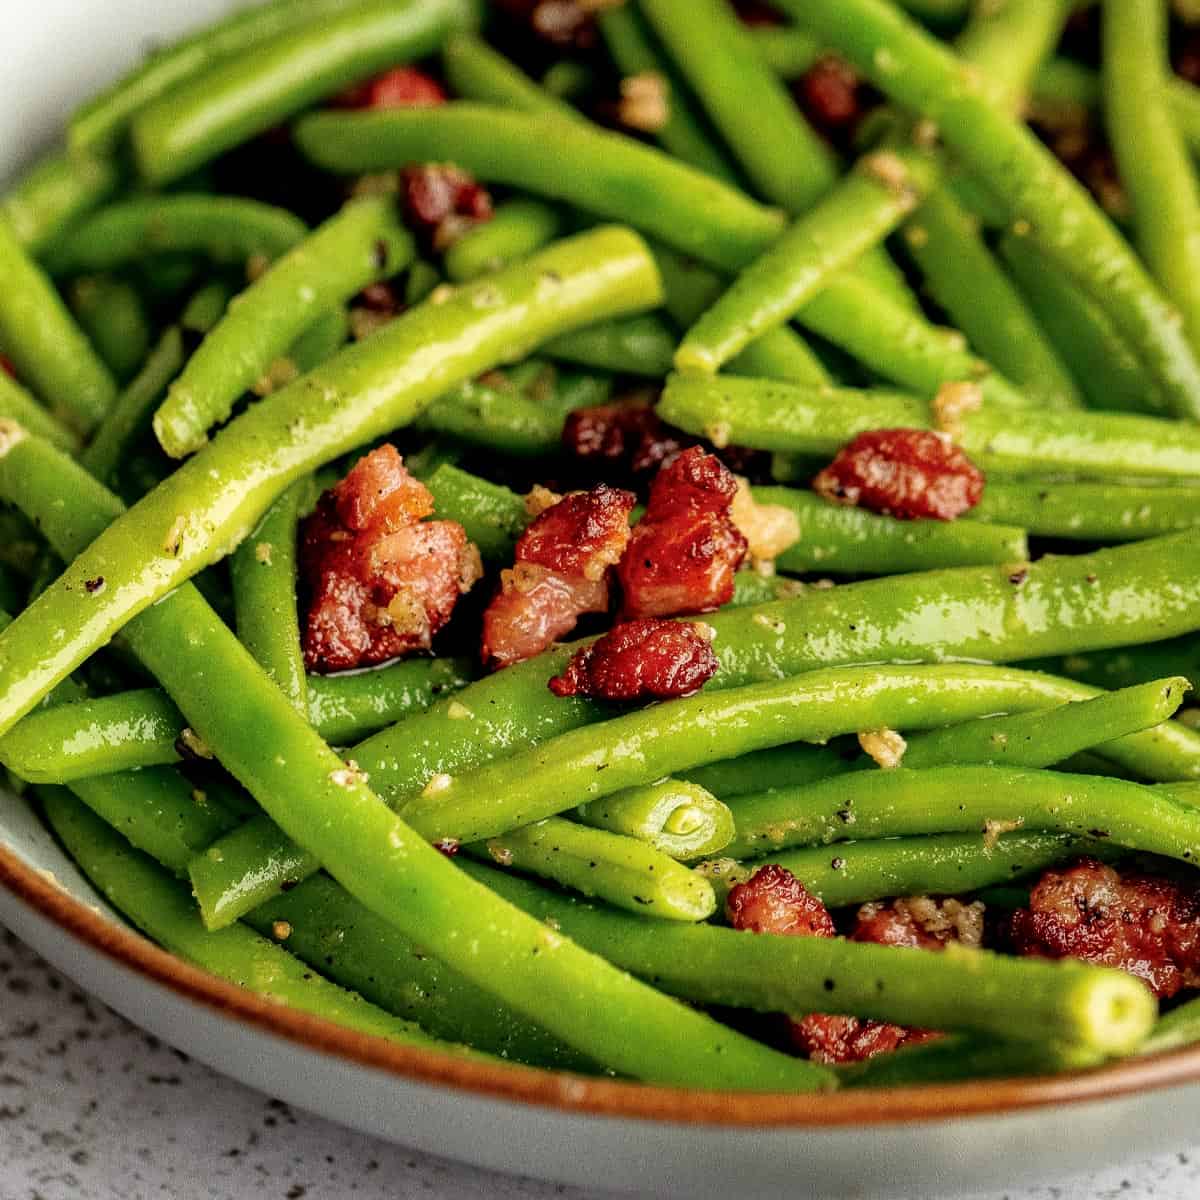 How to Cook Frozen Green Beans - The Stay At Home Chef